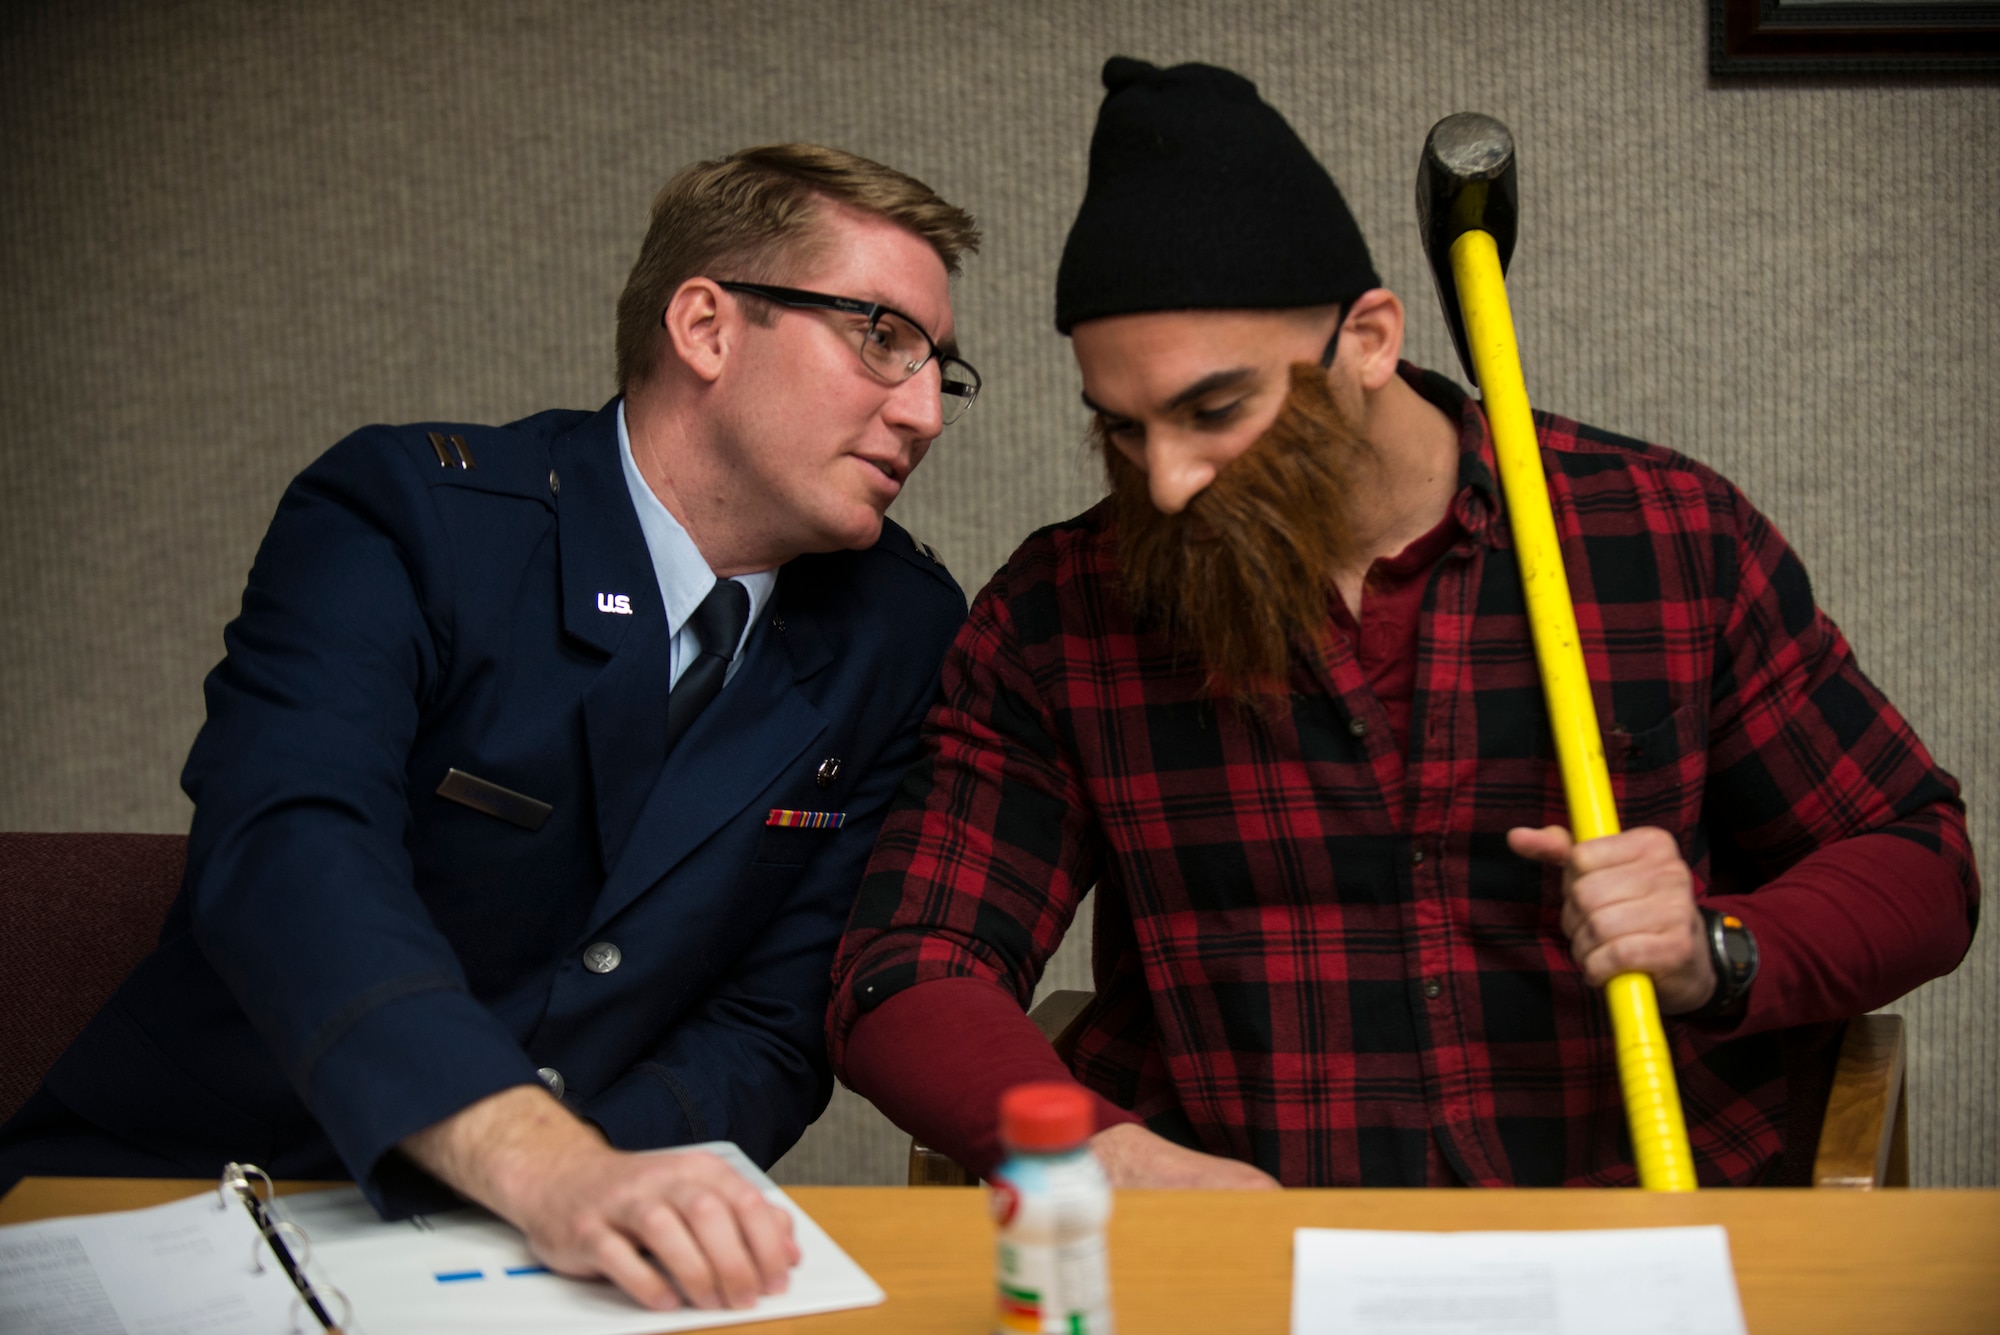 Lt. Col. Jorge Jimenez, 5th Comptroller Squadron commander, consults his lawyer during the mock trial of “Paul Bunyan vs. the state” during the 5th Bomb Wing Legal Office Law Day celebration, May 1, 2014. Jimenez, who was playing the role of Paul Bunyan, participated in teaching a sixth grade class from North Plains Elementary School the importance of the legal system. (U.S. Air Force photos/Airman 1st Class Lauren Pitts)